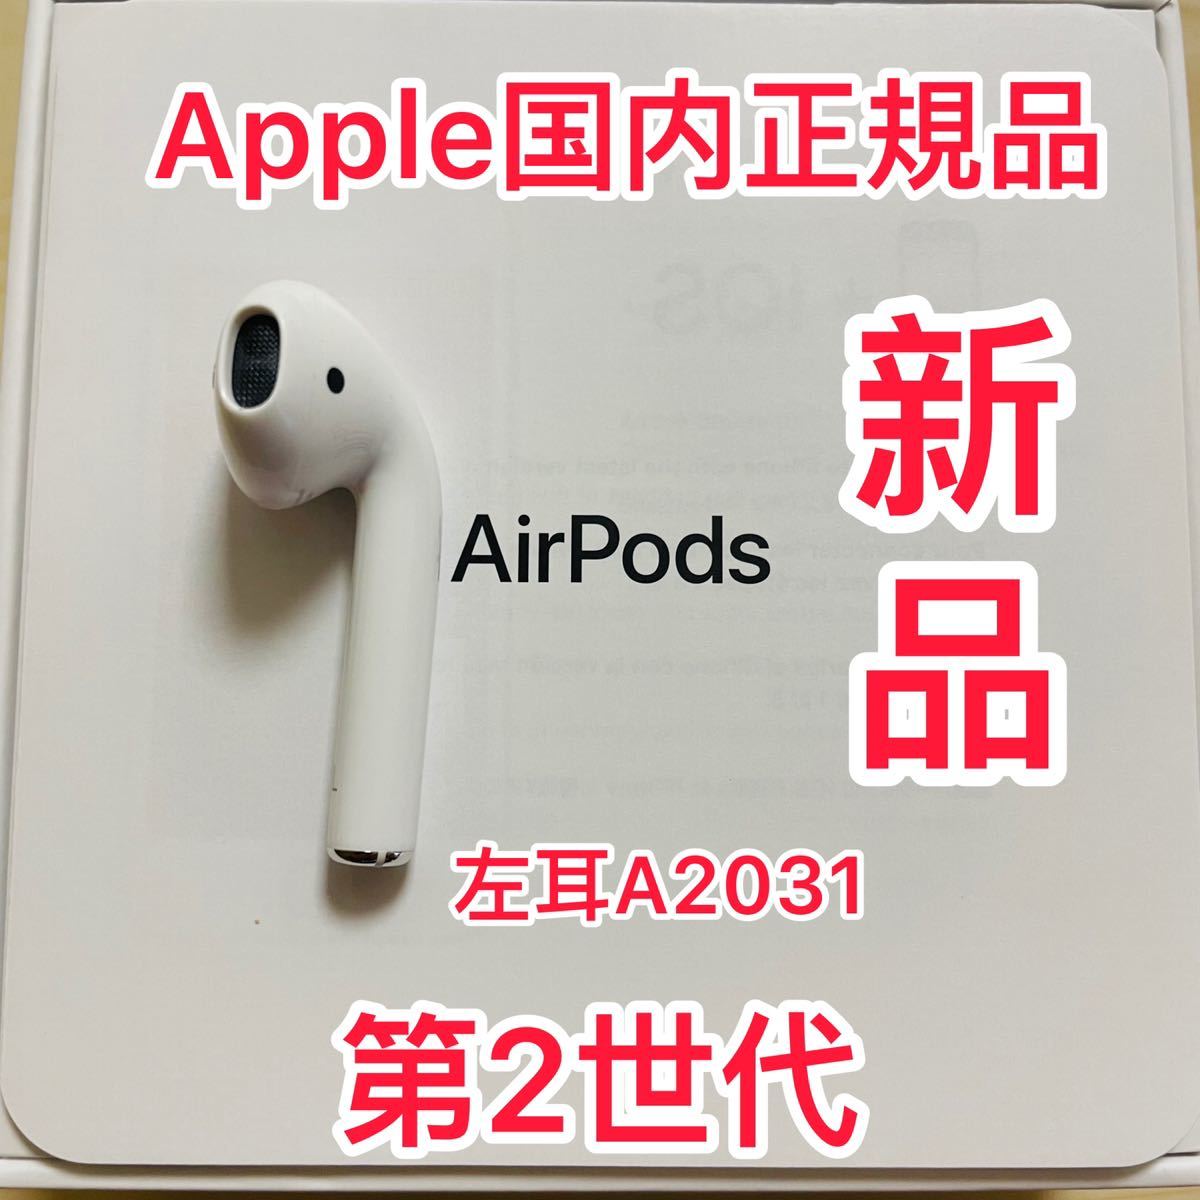 PayPayフリマ｜新品 エアーポッズ 第二世代 第２世代AirPods 左耳のみ L片耳 正規品